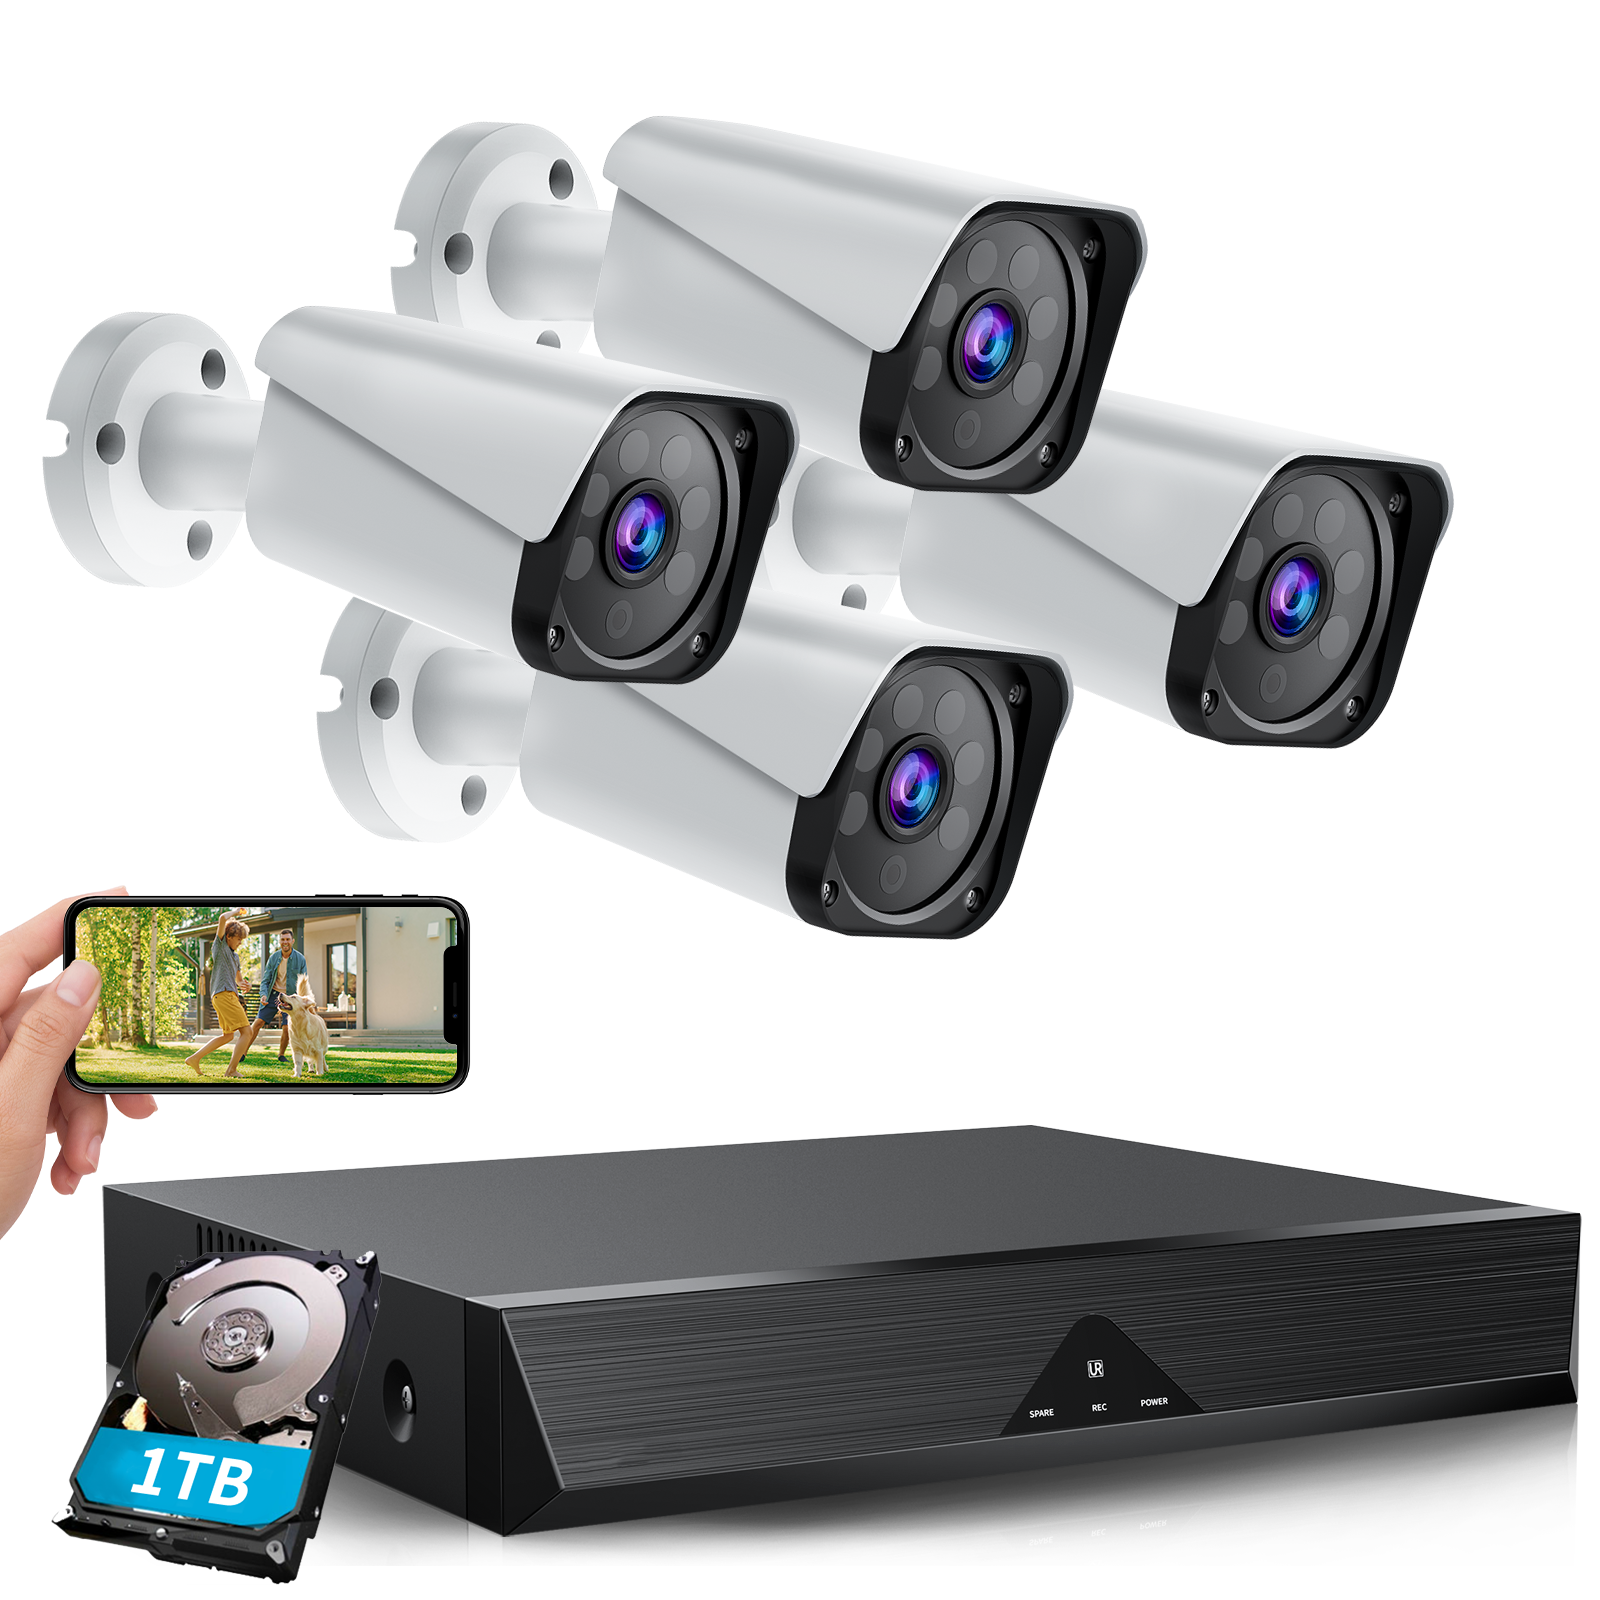 Campark W204 8CH 4Pcs 1080P DVR Cameras Security Camera With 3TB Hard Drive（Only available in the US））